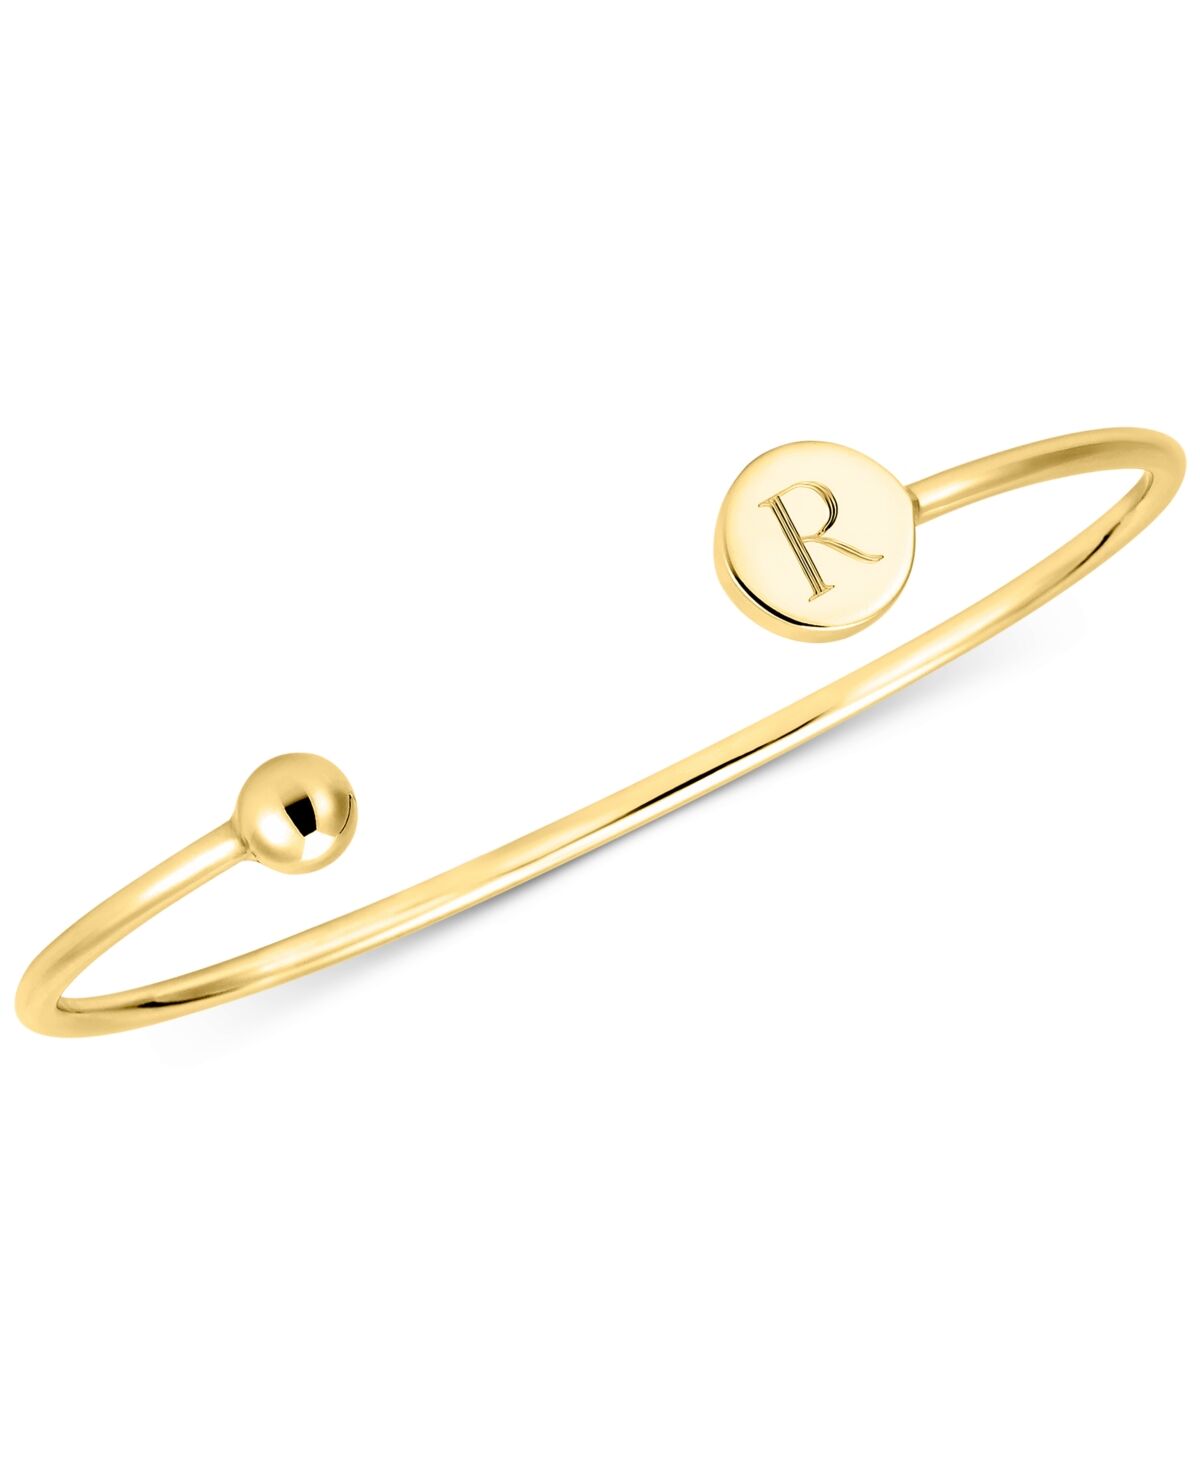 Sarah Chloe Initial Elle Cuff Bangle Bracelet in 14K Gold-Plated Sterling Silver - R